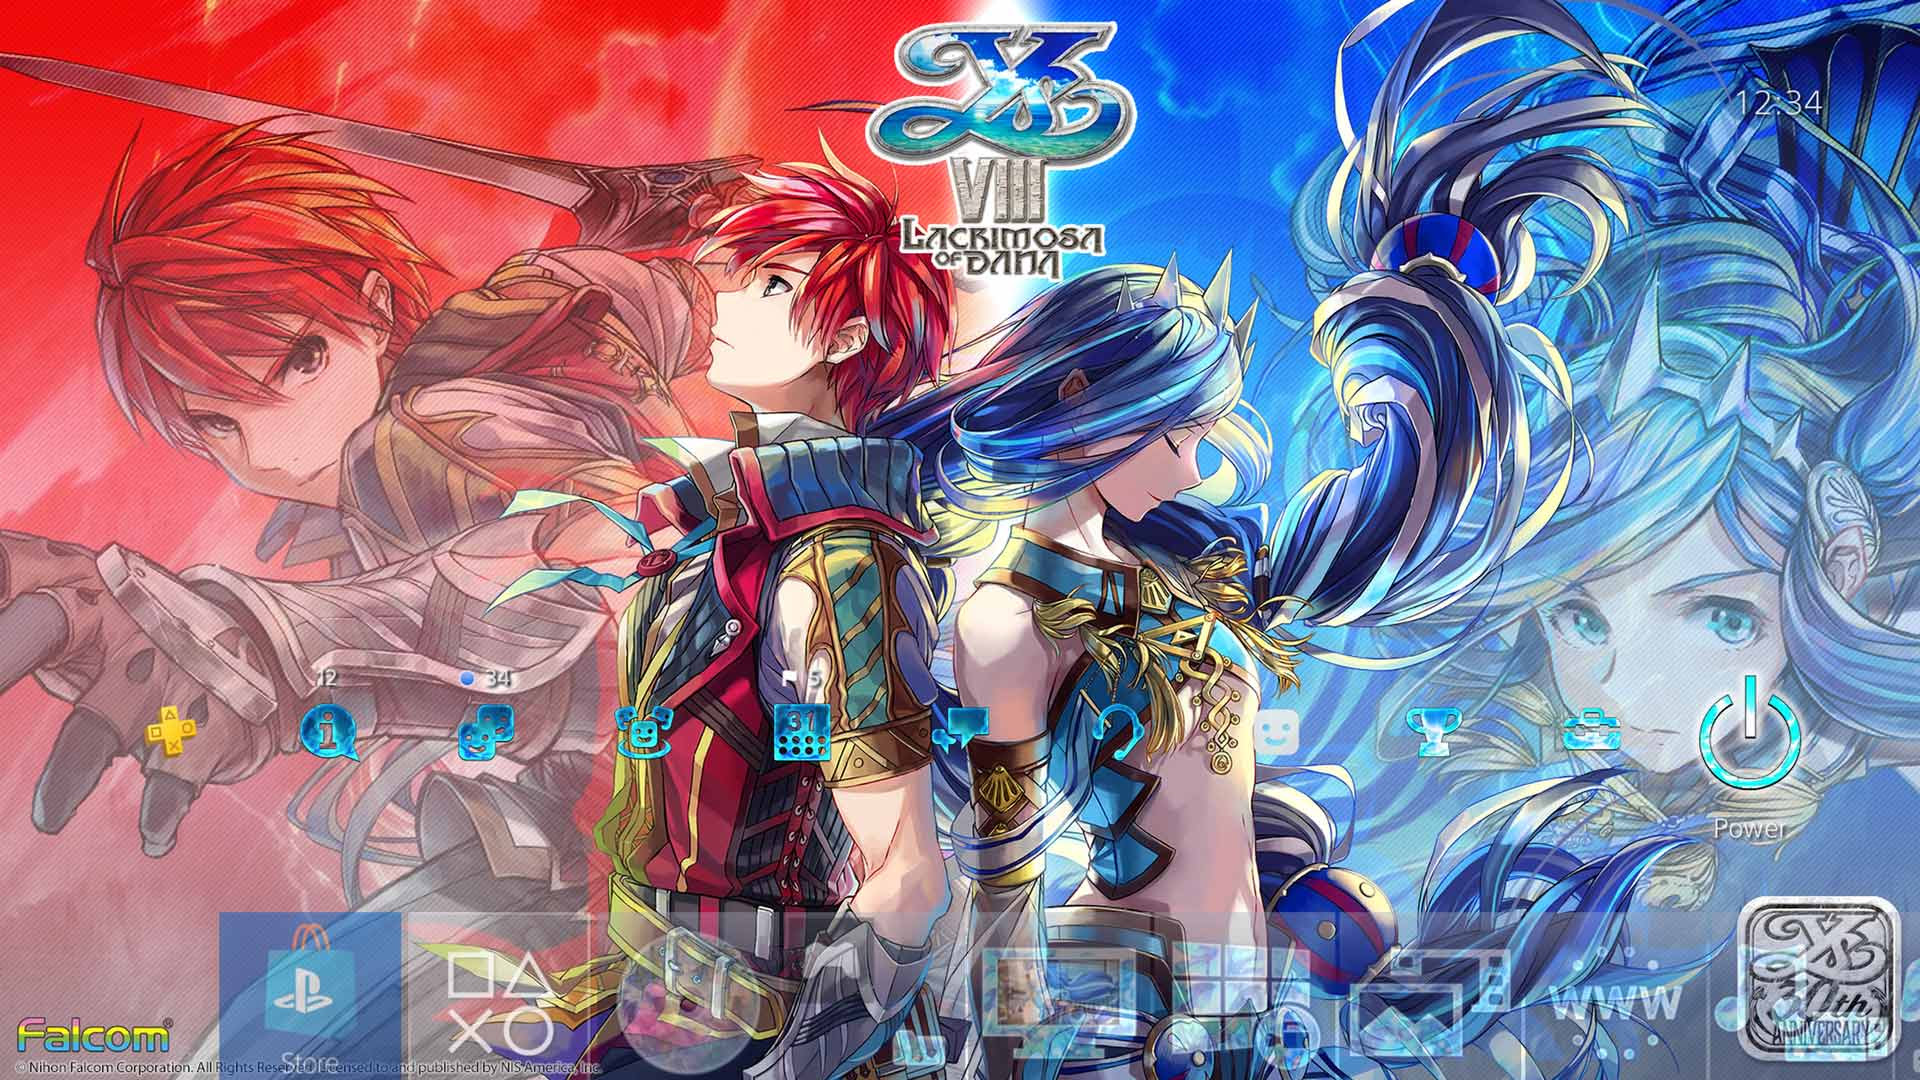 Ys VIII: Lacrimosa of Dana heading to Switch this Summer 